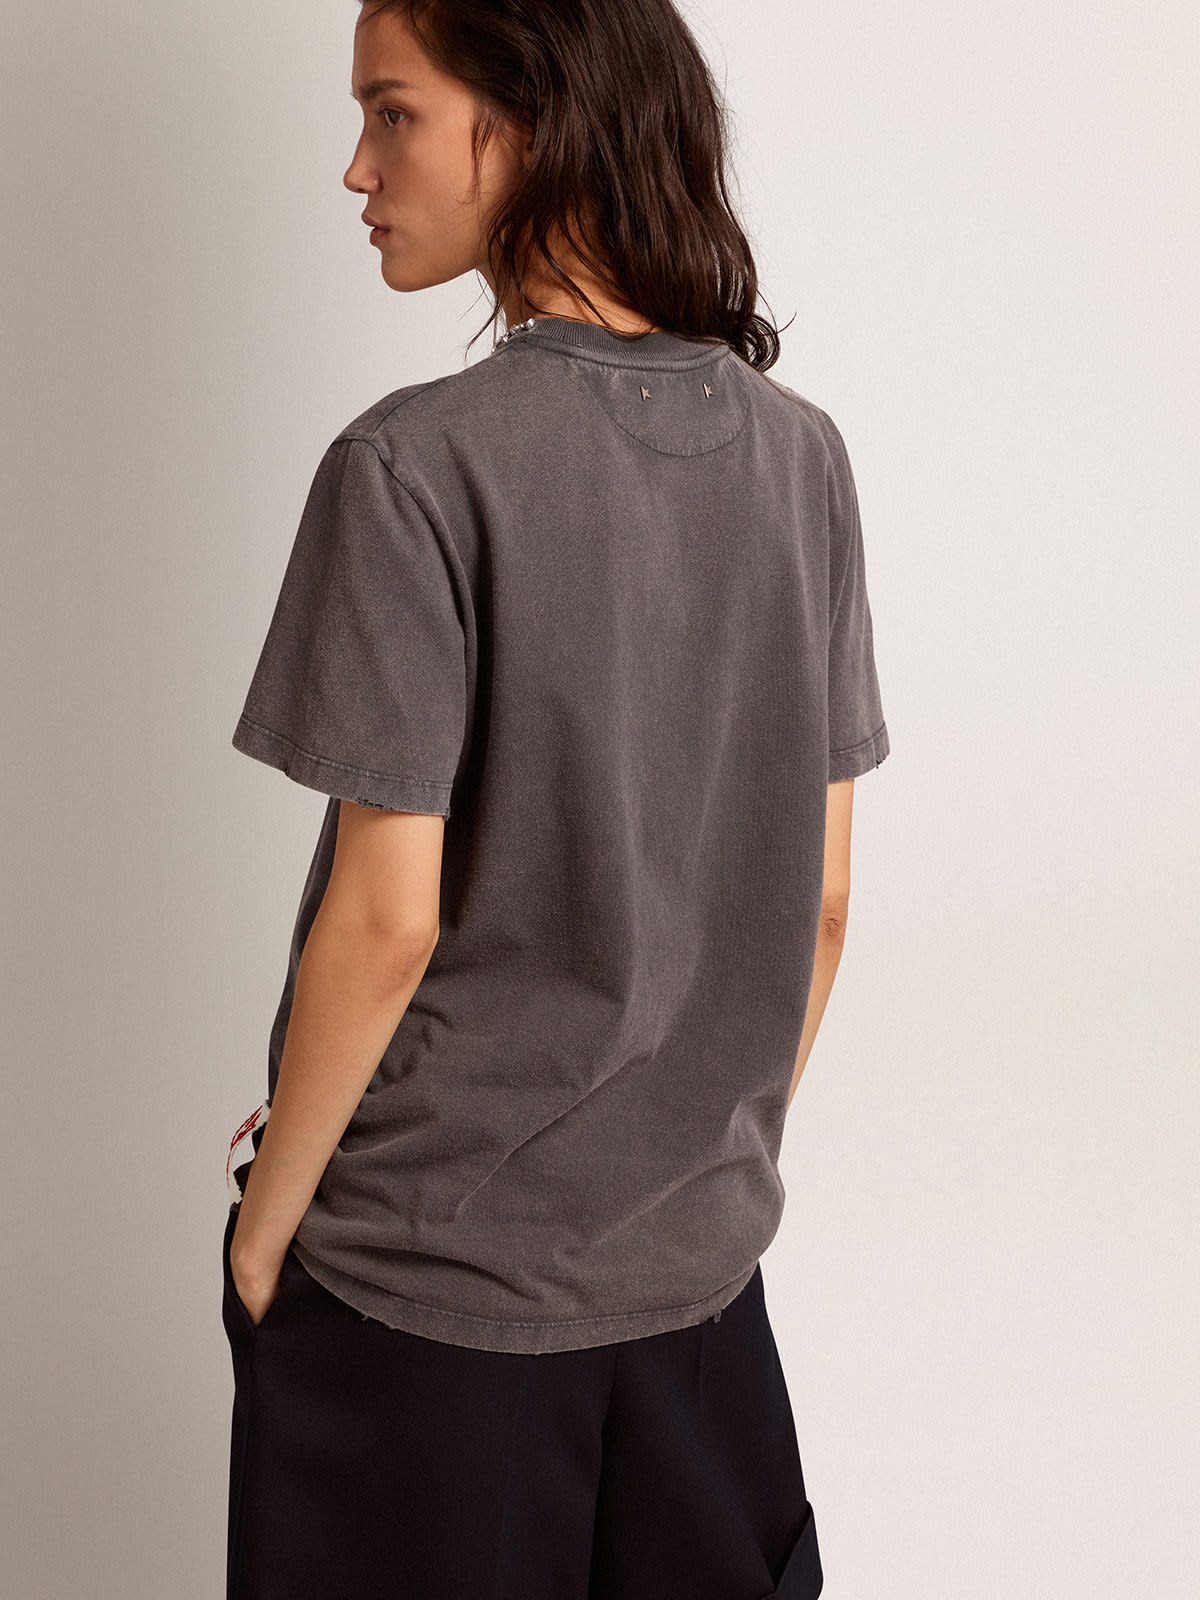 Golden Goose - Women's anthracite gray T-shirt with crystals in 